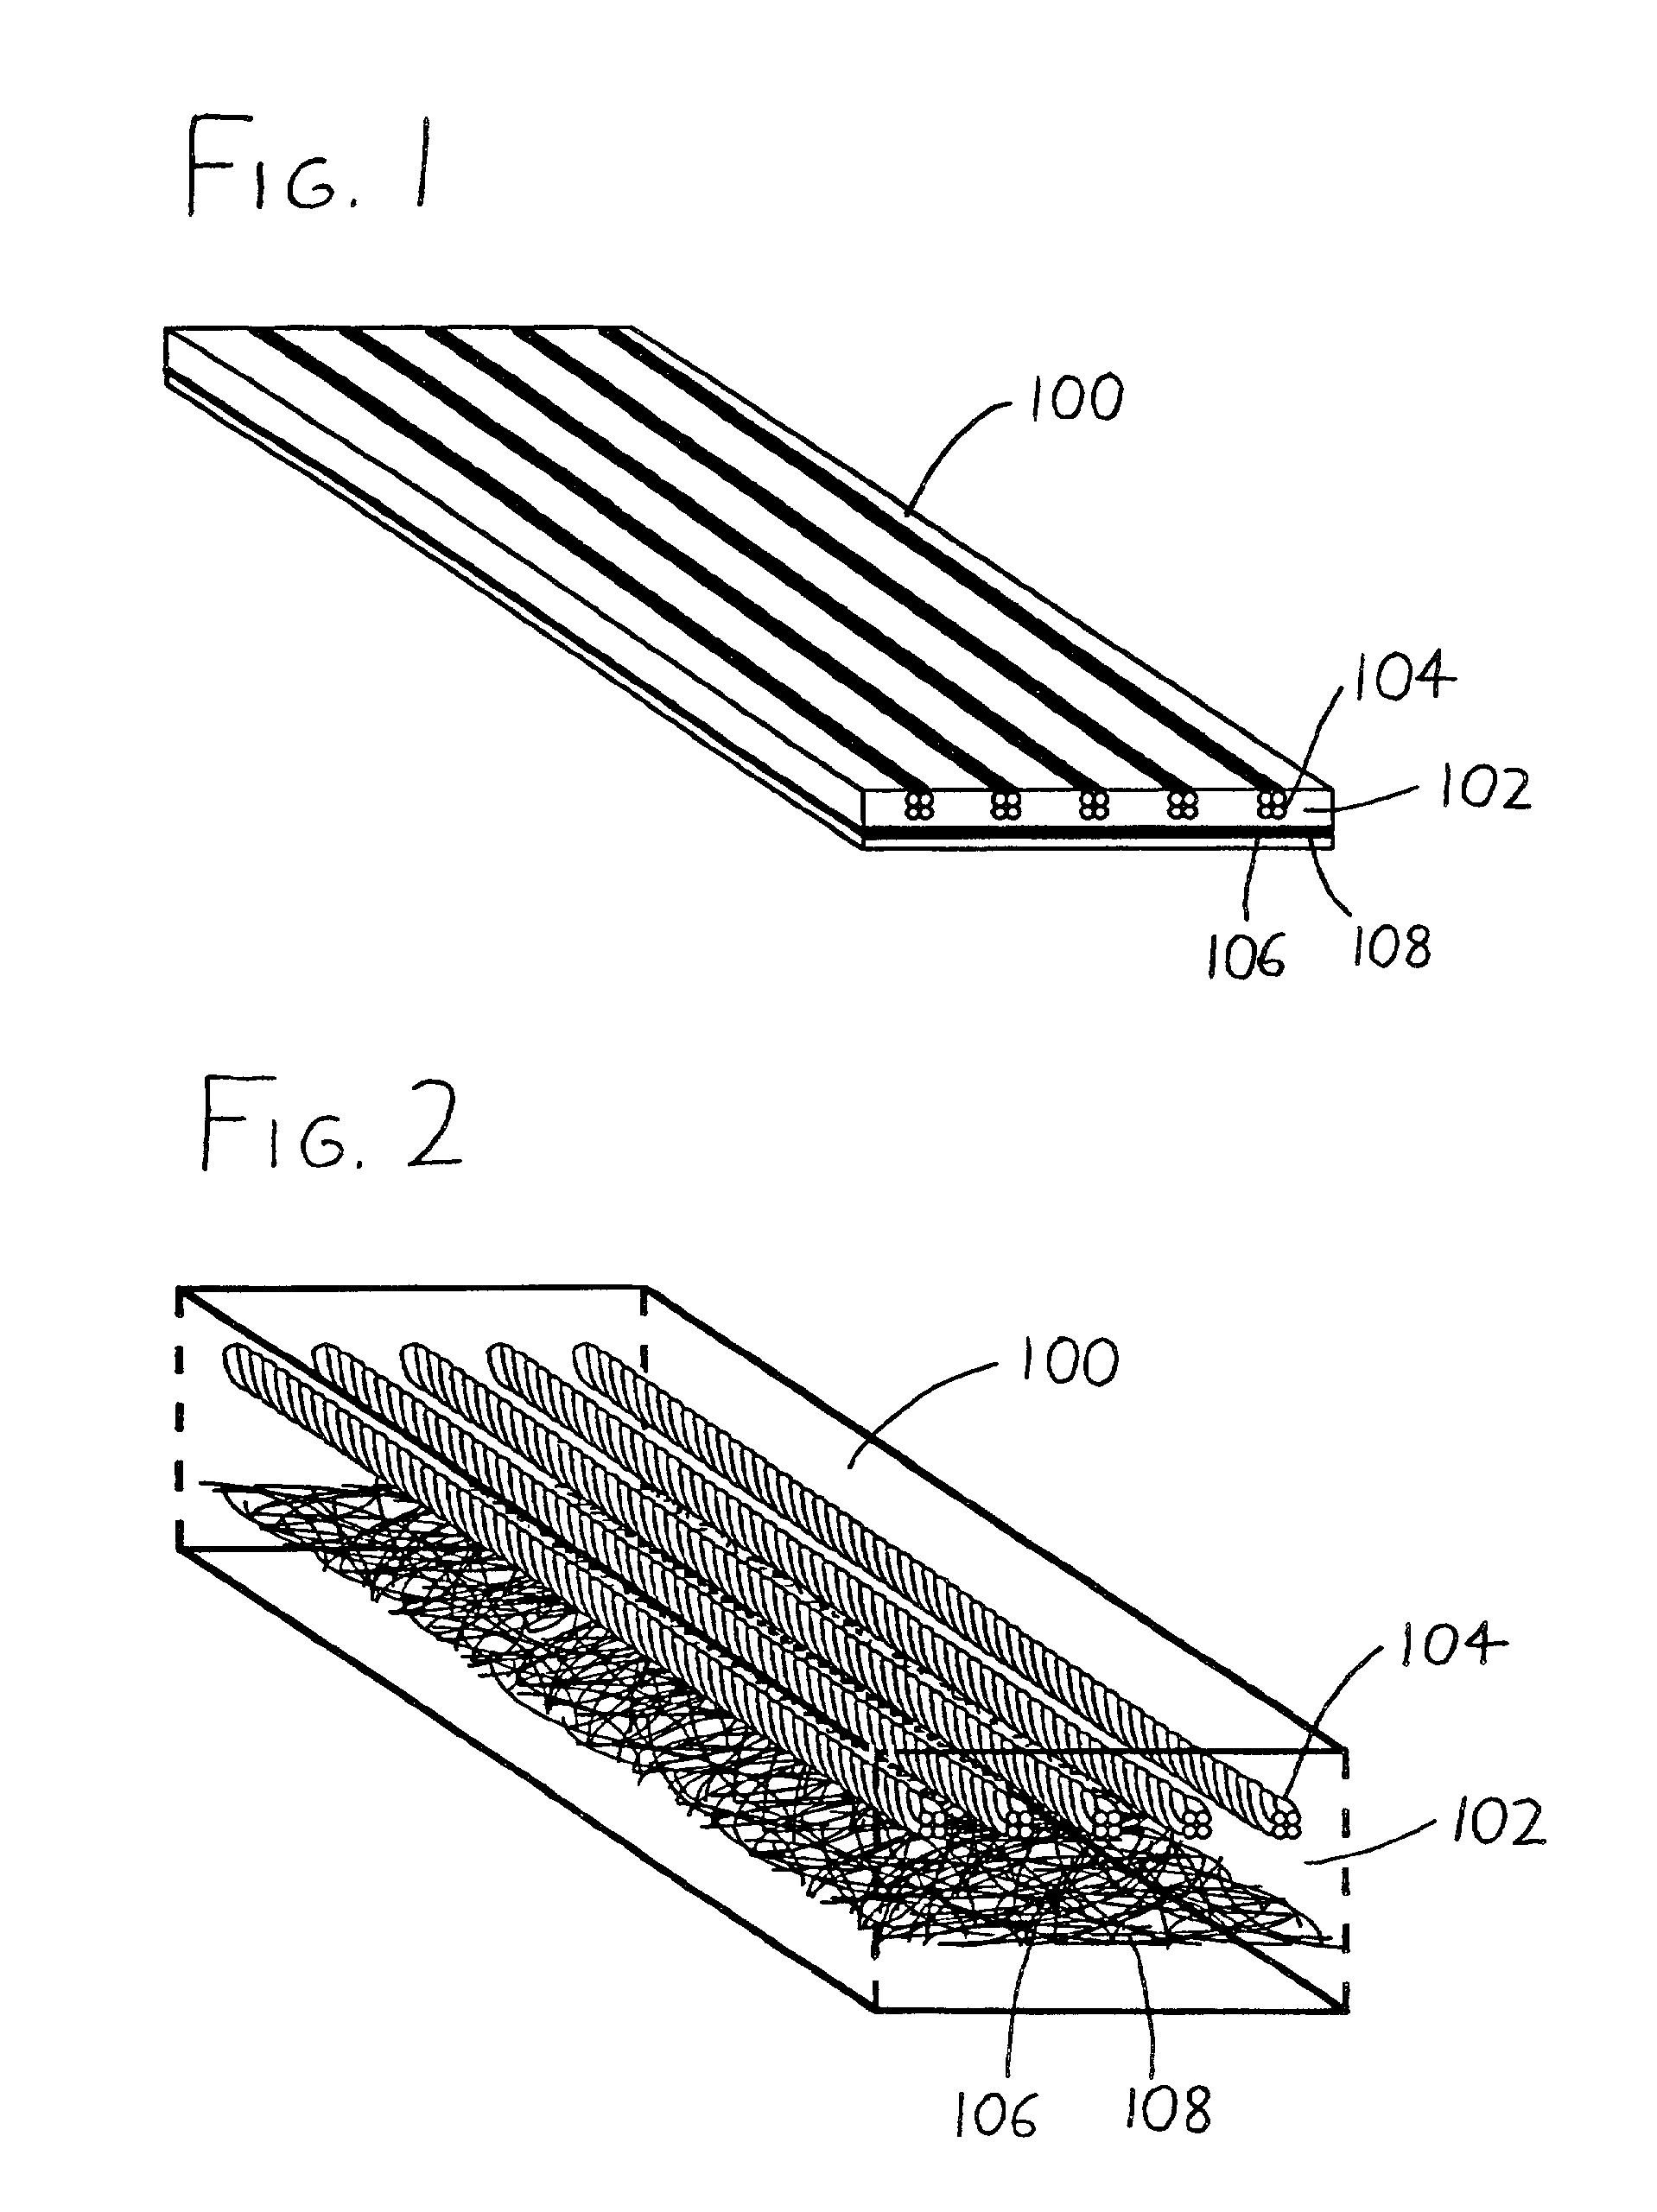 Structural reinforcement using composite strips